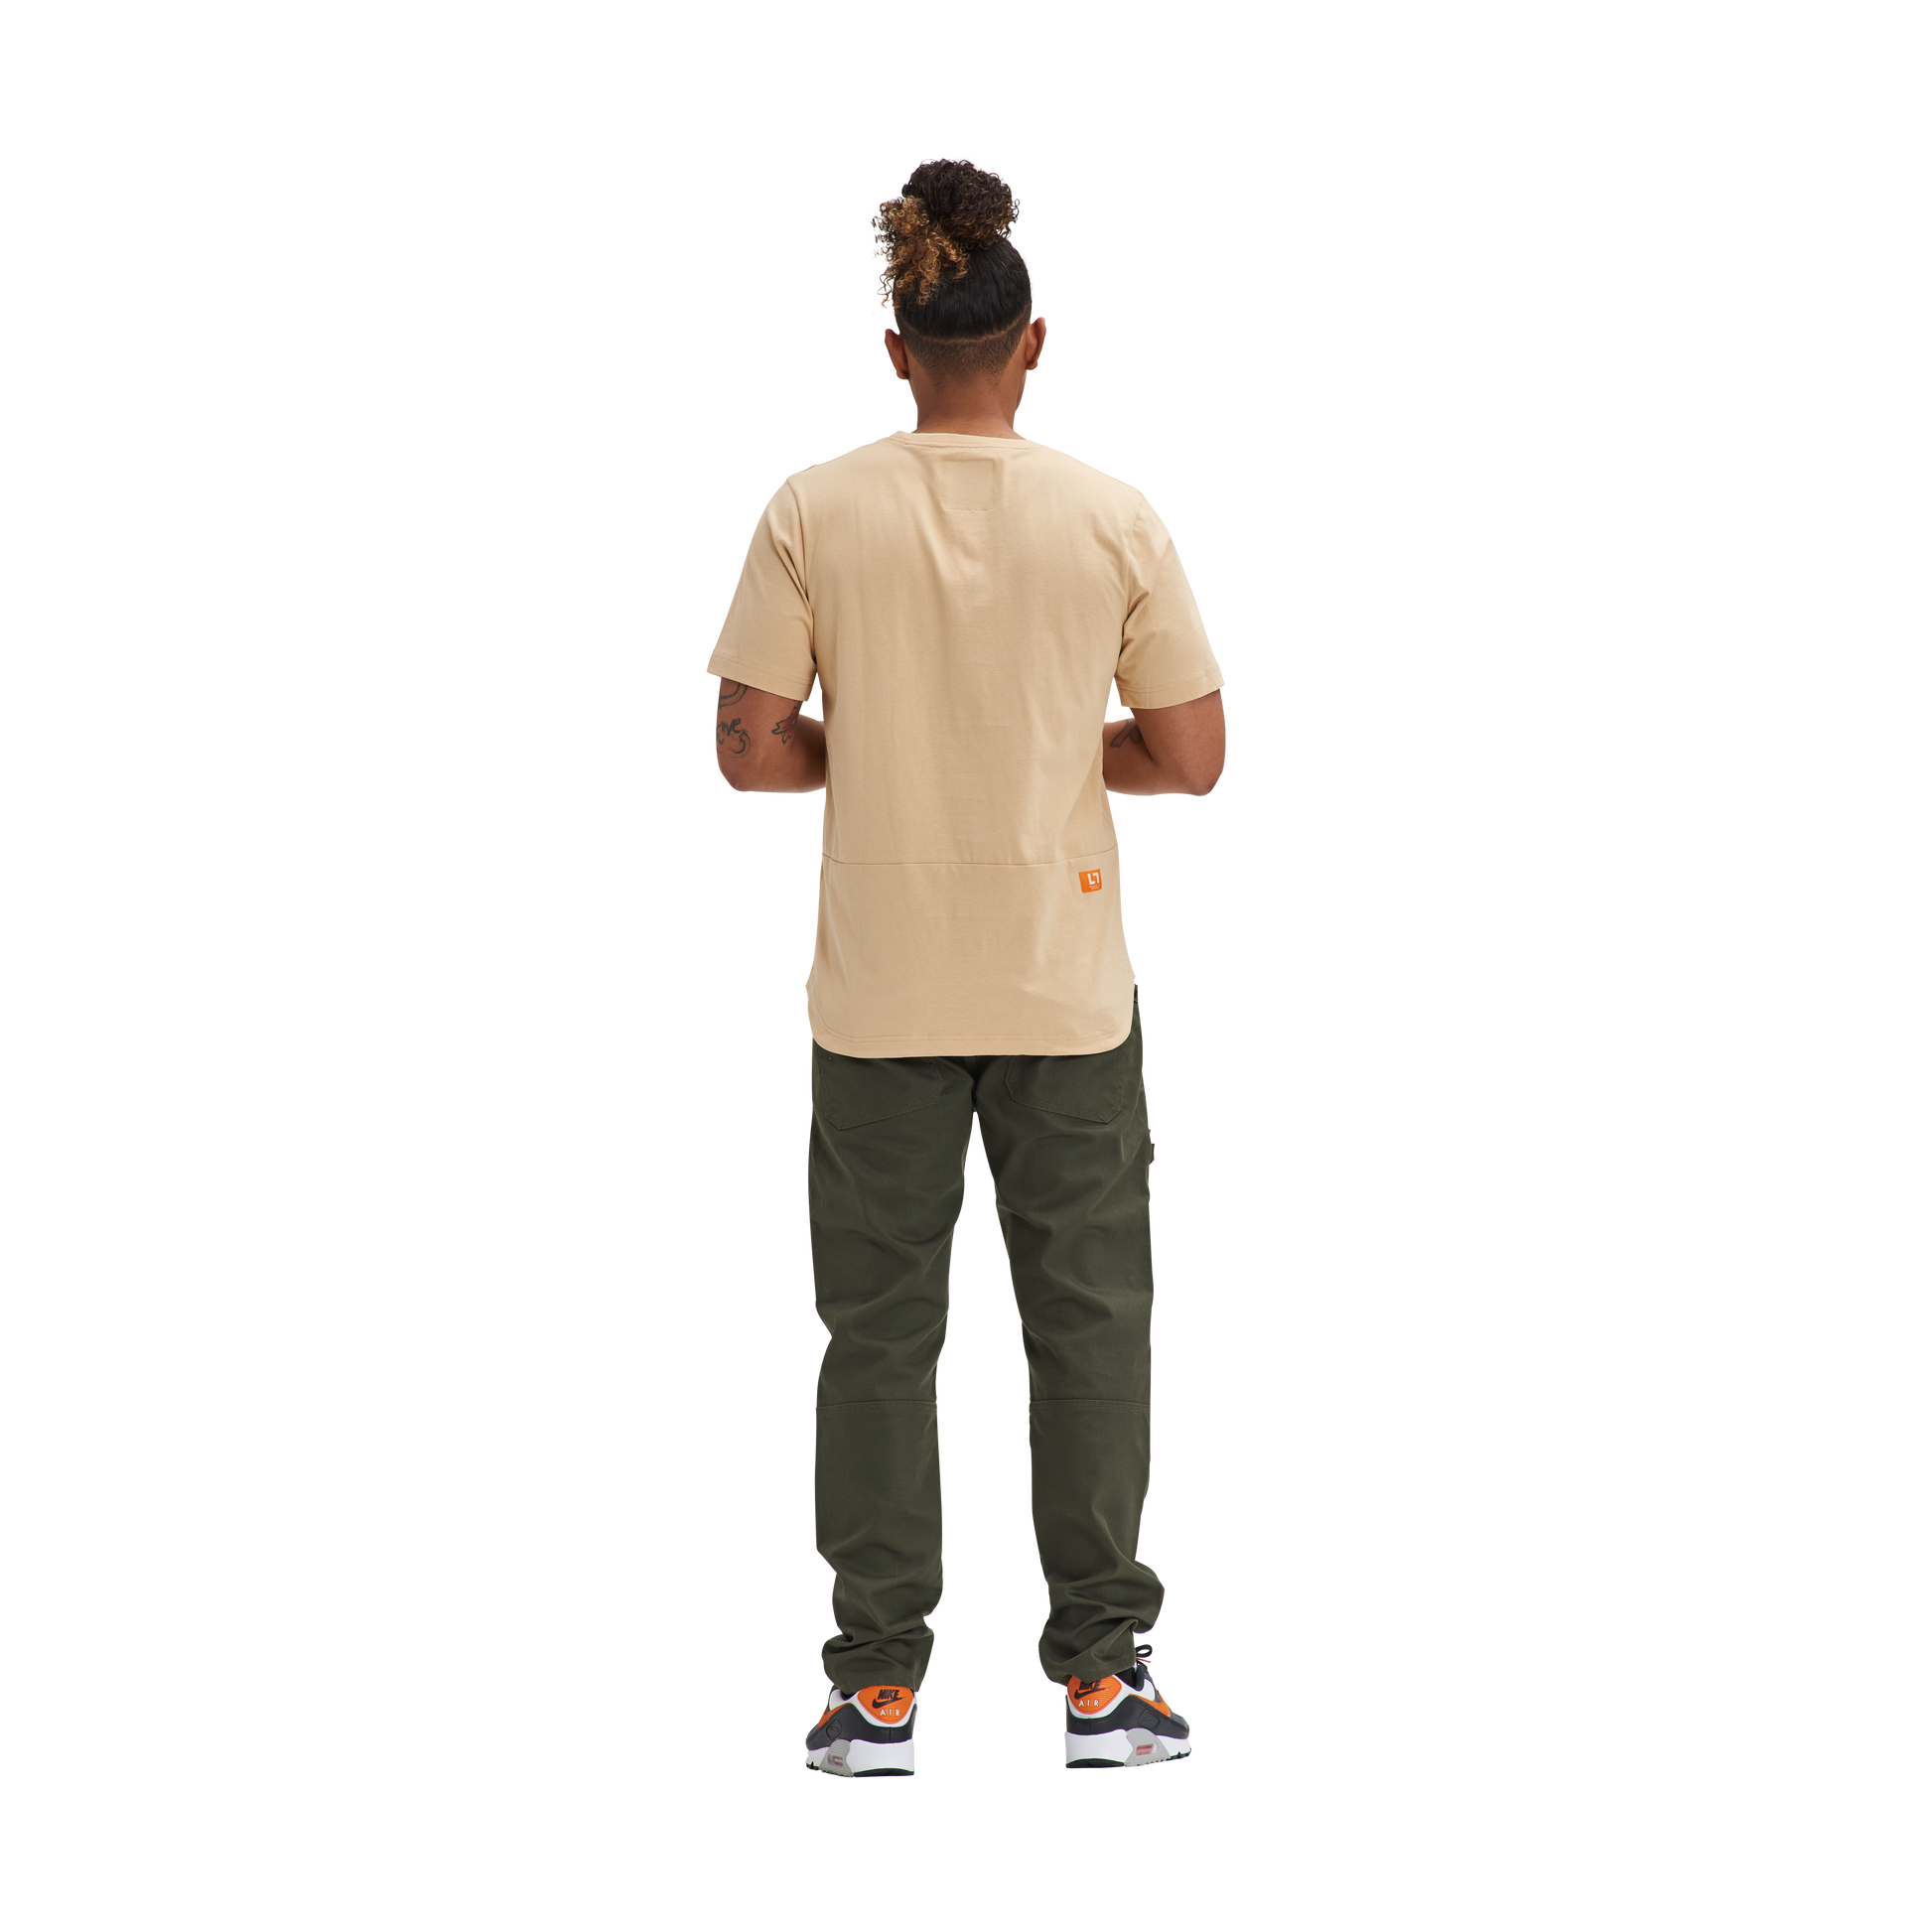 The back view of a man wearing a Kulture MIA Drop Cut Tee (3) PK White / Sand / Mint and green pants.